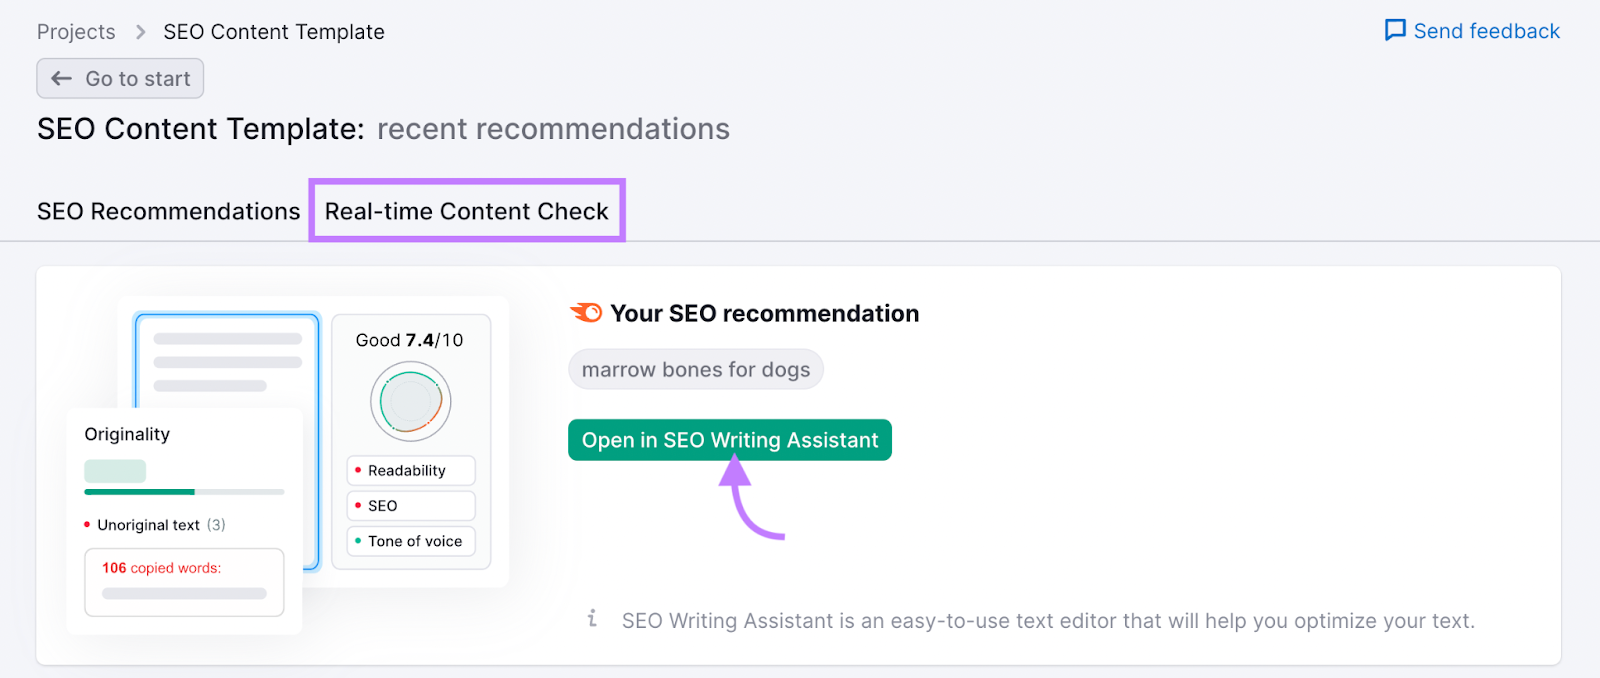 “Open in SEO Writing Assistant” button selected under “Real-time Content Check” tab